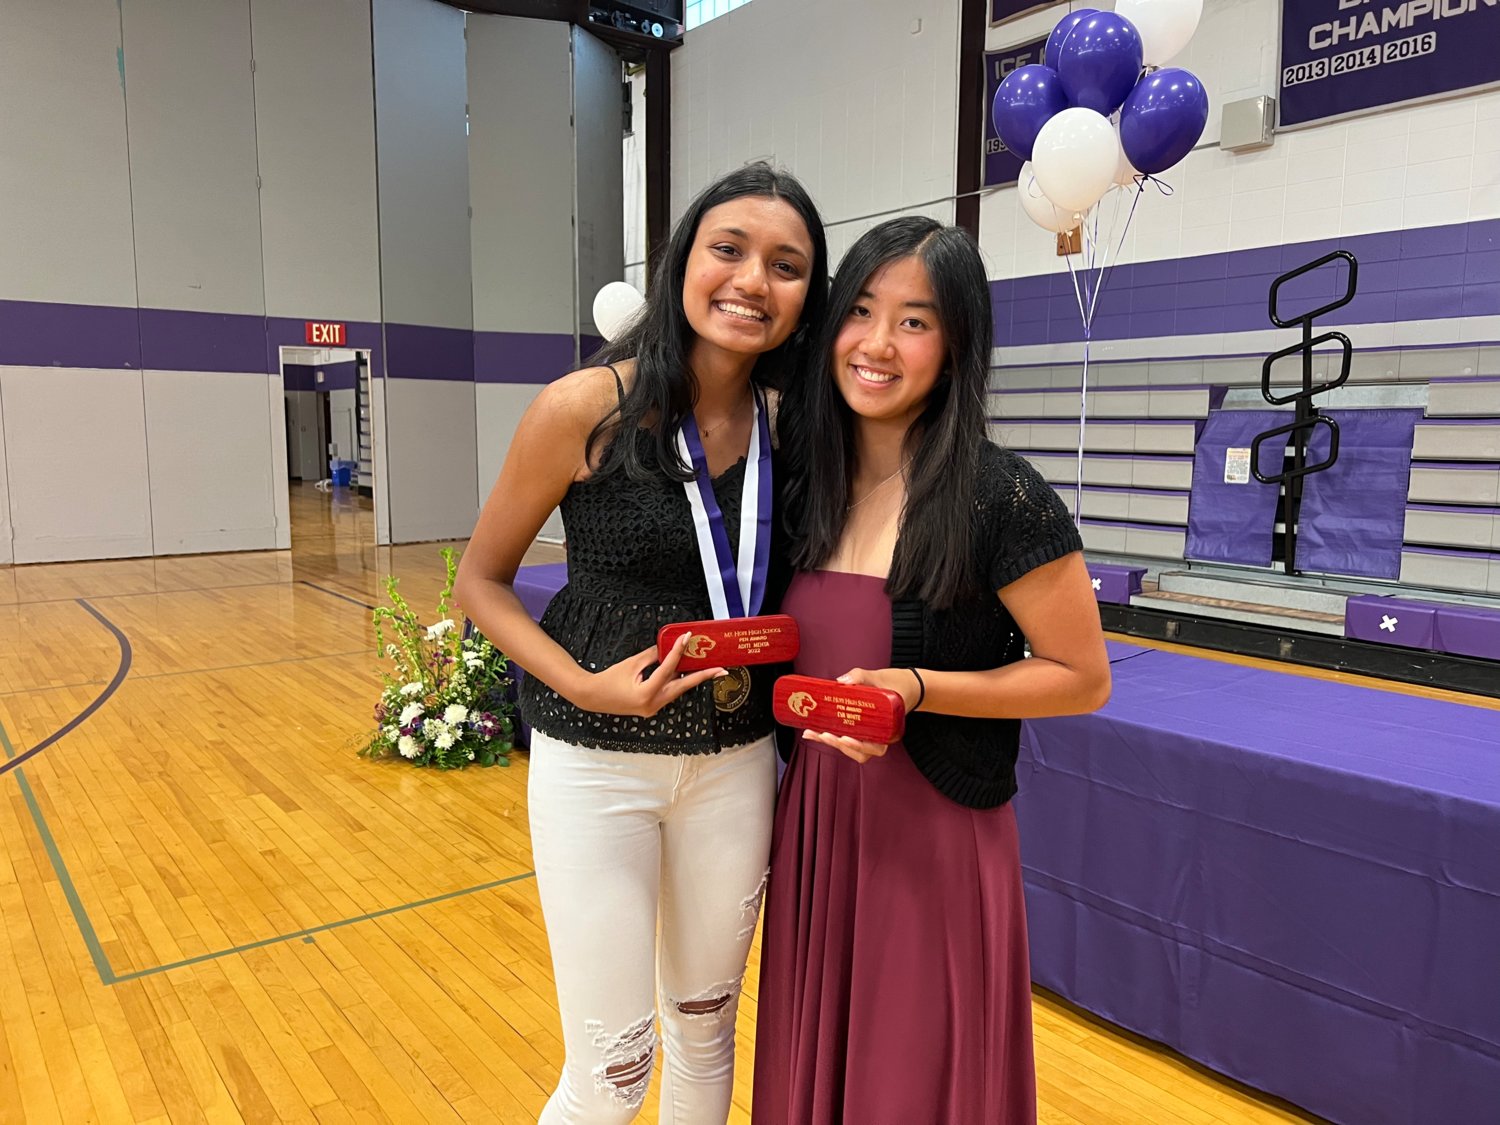 Aditi Mehta and Eva White received Pen Awards for receiving the highest GPA among graduating students.